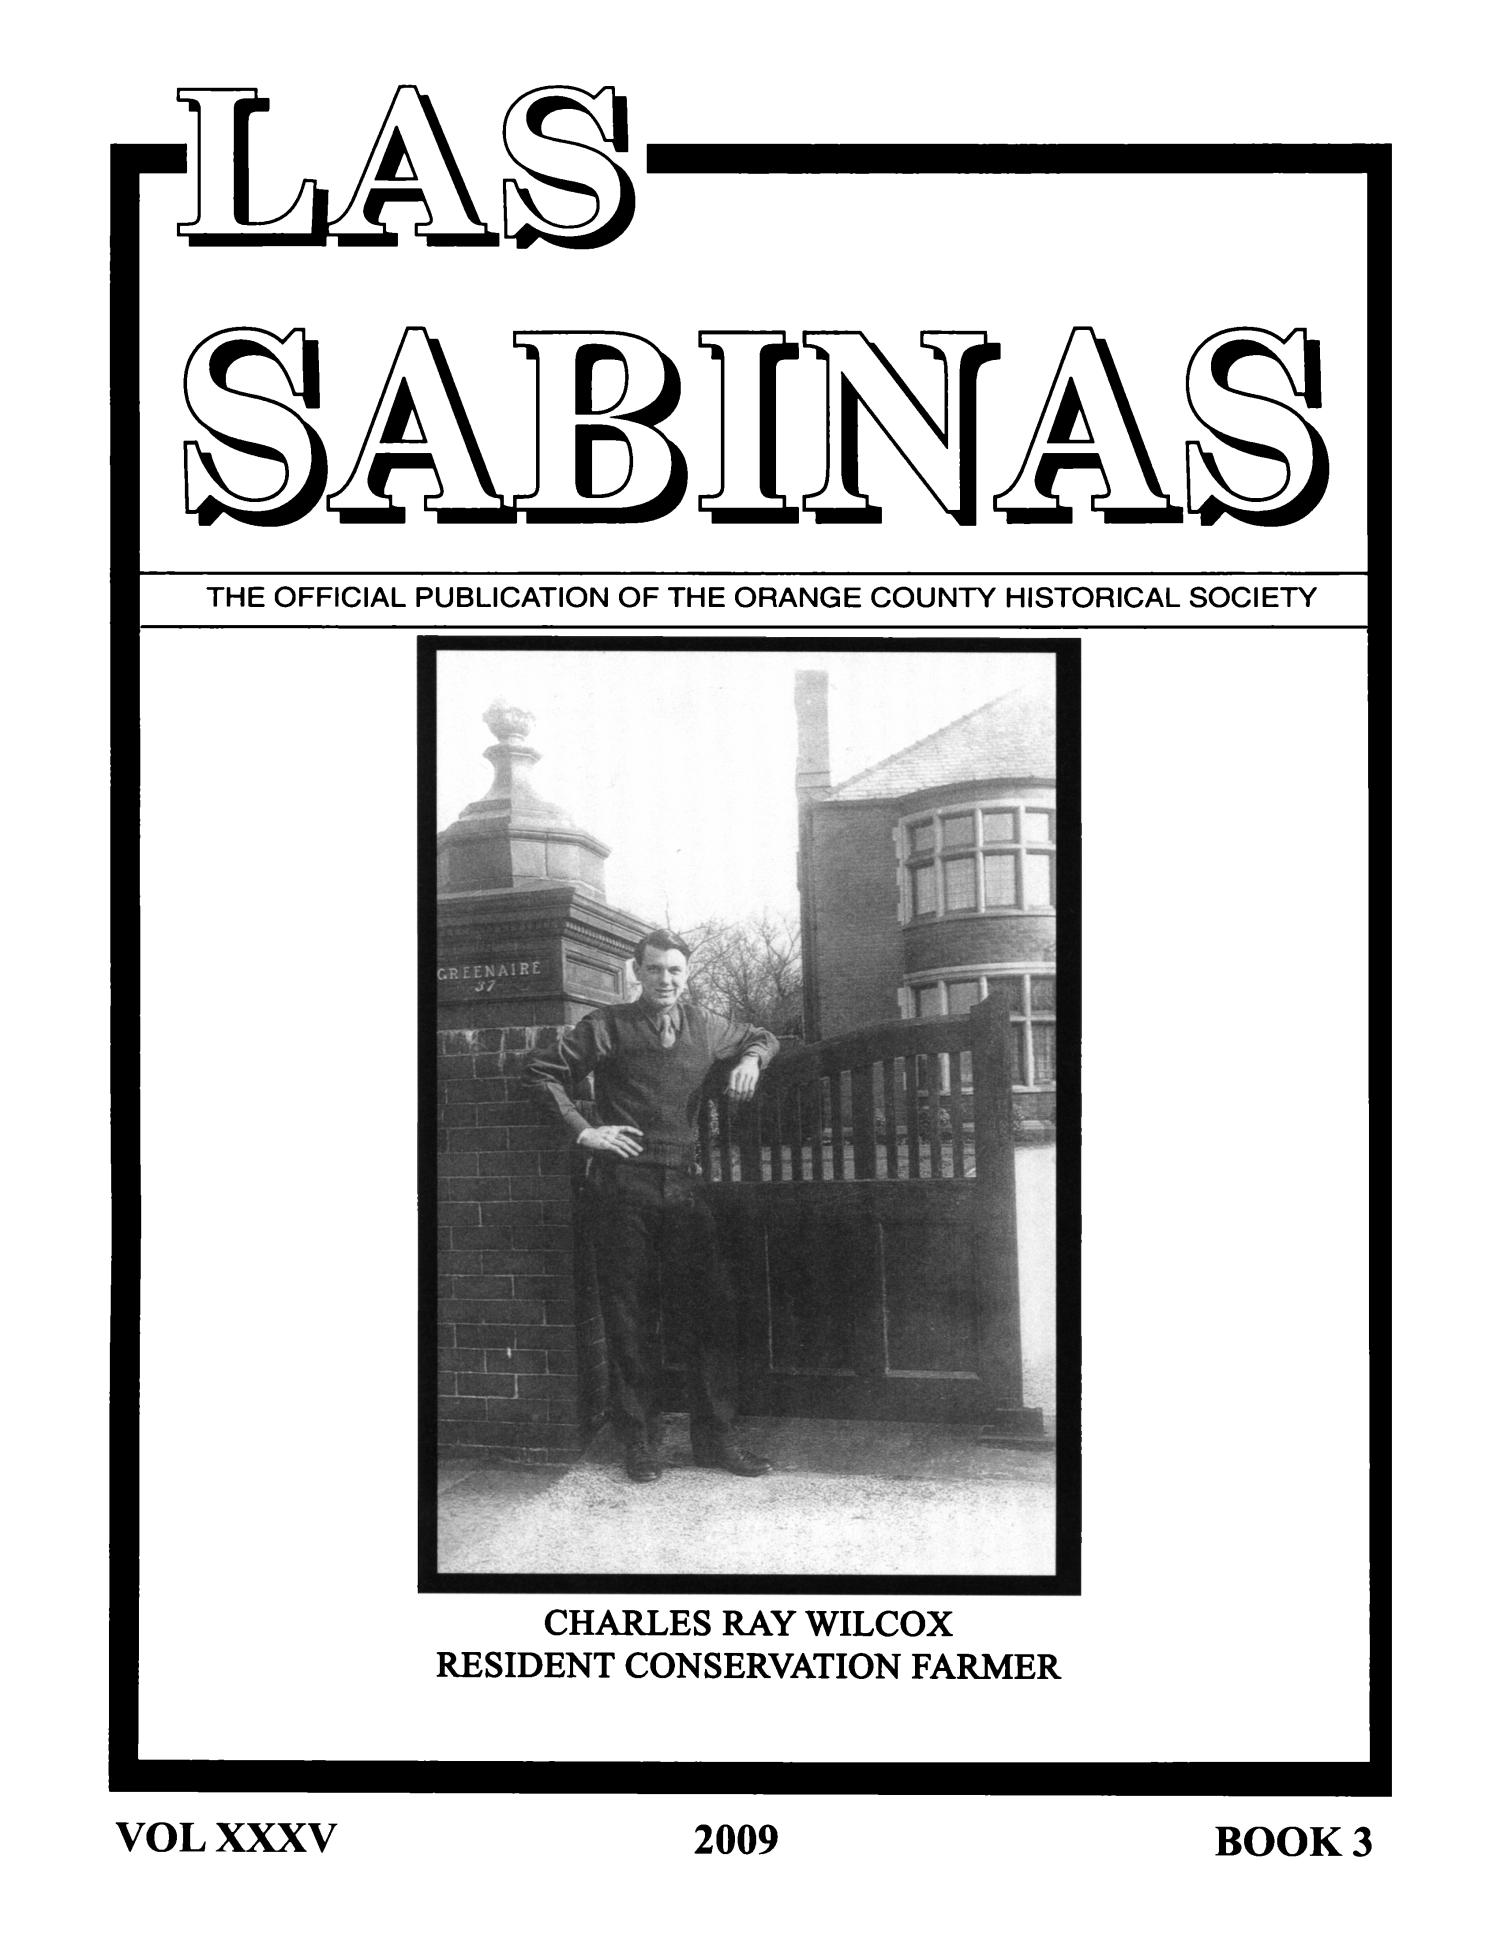 Las Sabinas, Volume 35, Number 3, 2009
                                                
                                                    Front Cover
                                                